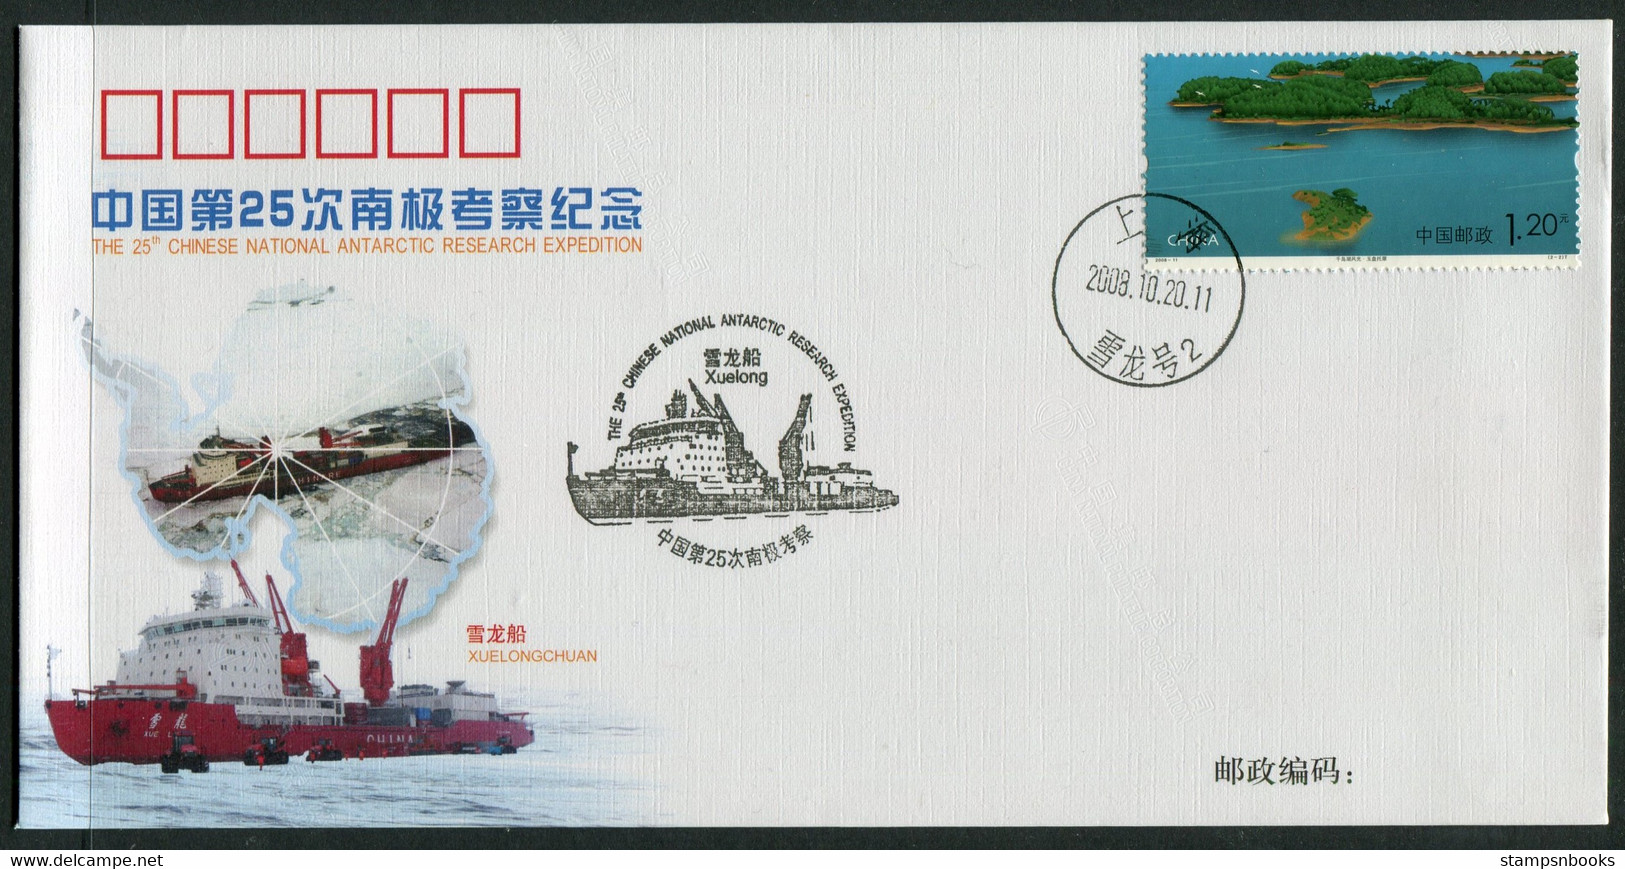 2008/9 China 25th Chinese National Antarctic Research Expedition X 3 Polar Antarctica Penquin Ship Covers - Programmes Scientifiques